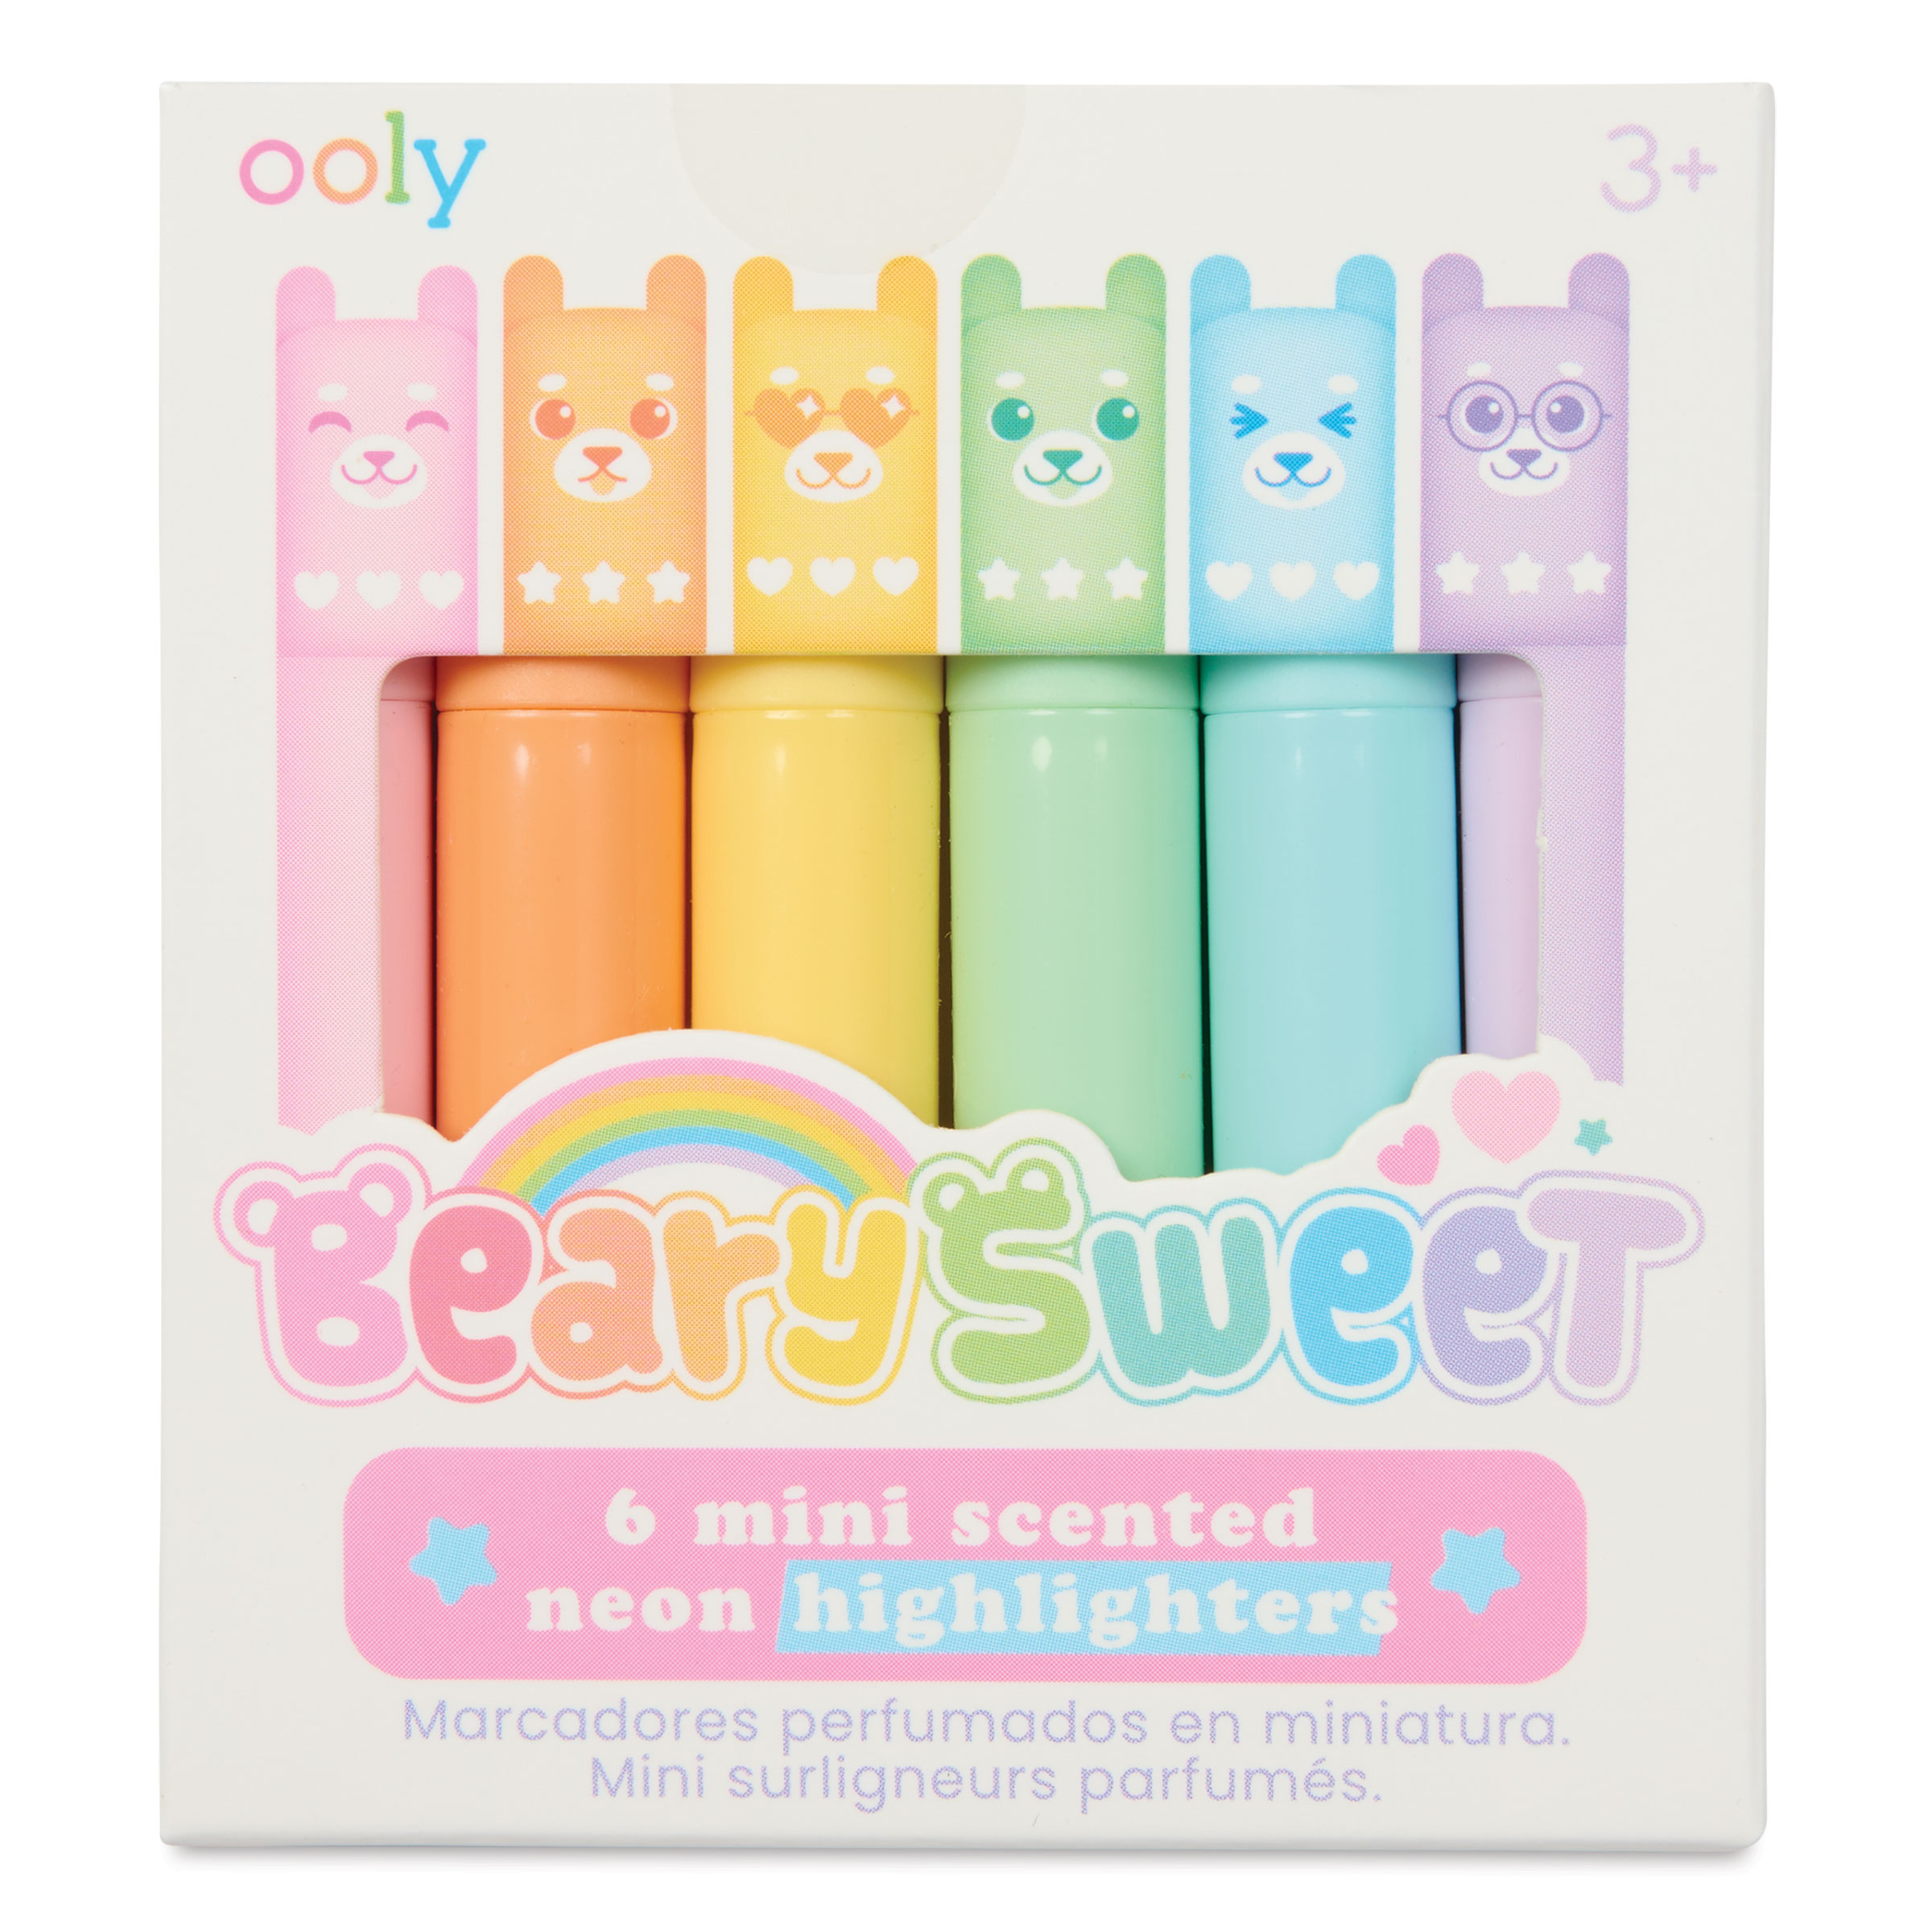 Scented Candy Highlighters - OwlCrate